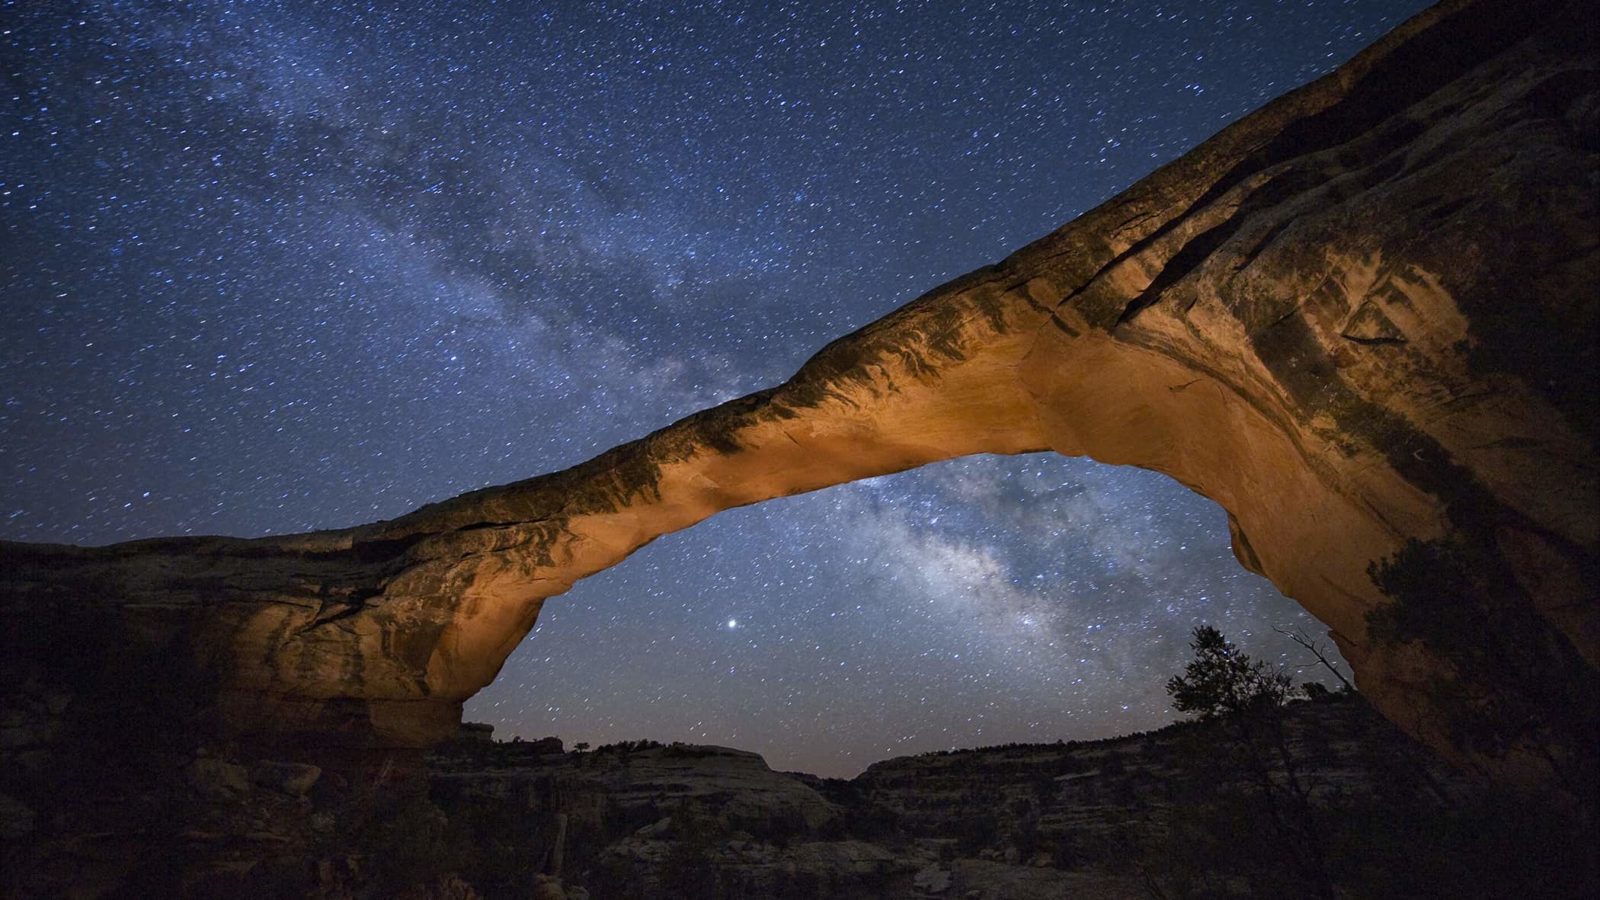 A starry night gleams above Owachomo Bridge at Natural Bridges National Monument, Utah, 2008. Photo by Jim Richardson/ National Geographic Stock. Part of the exhibition National Geographic Greatest Photographs of the American West.